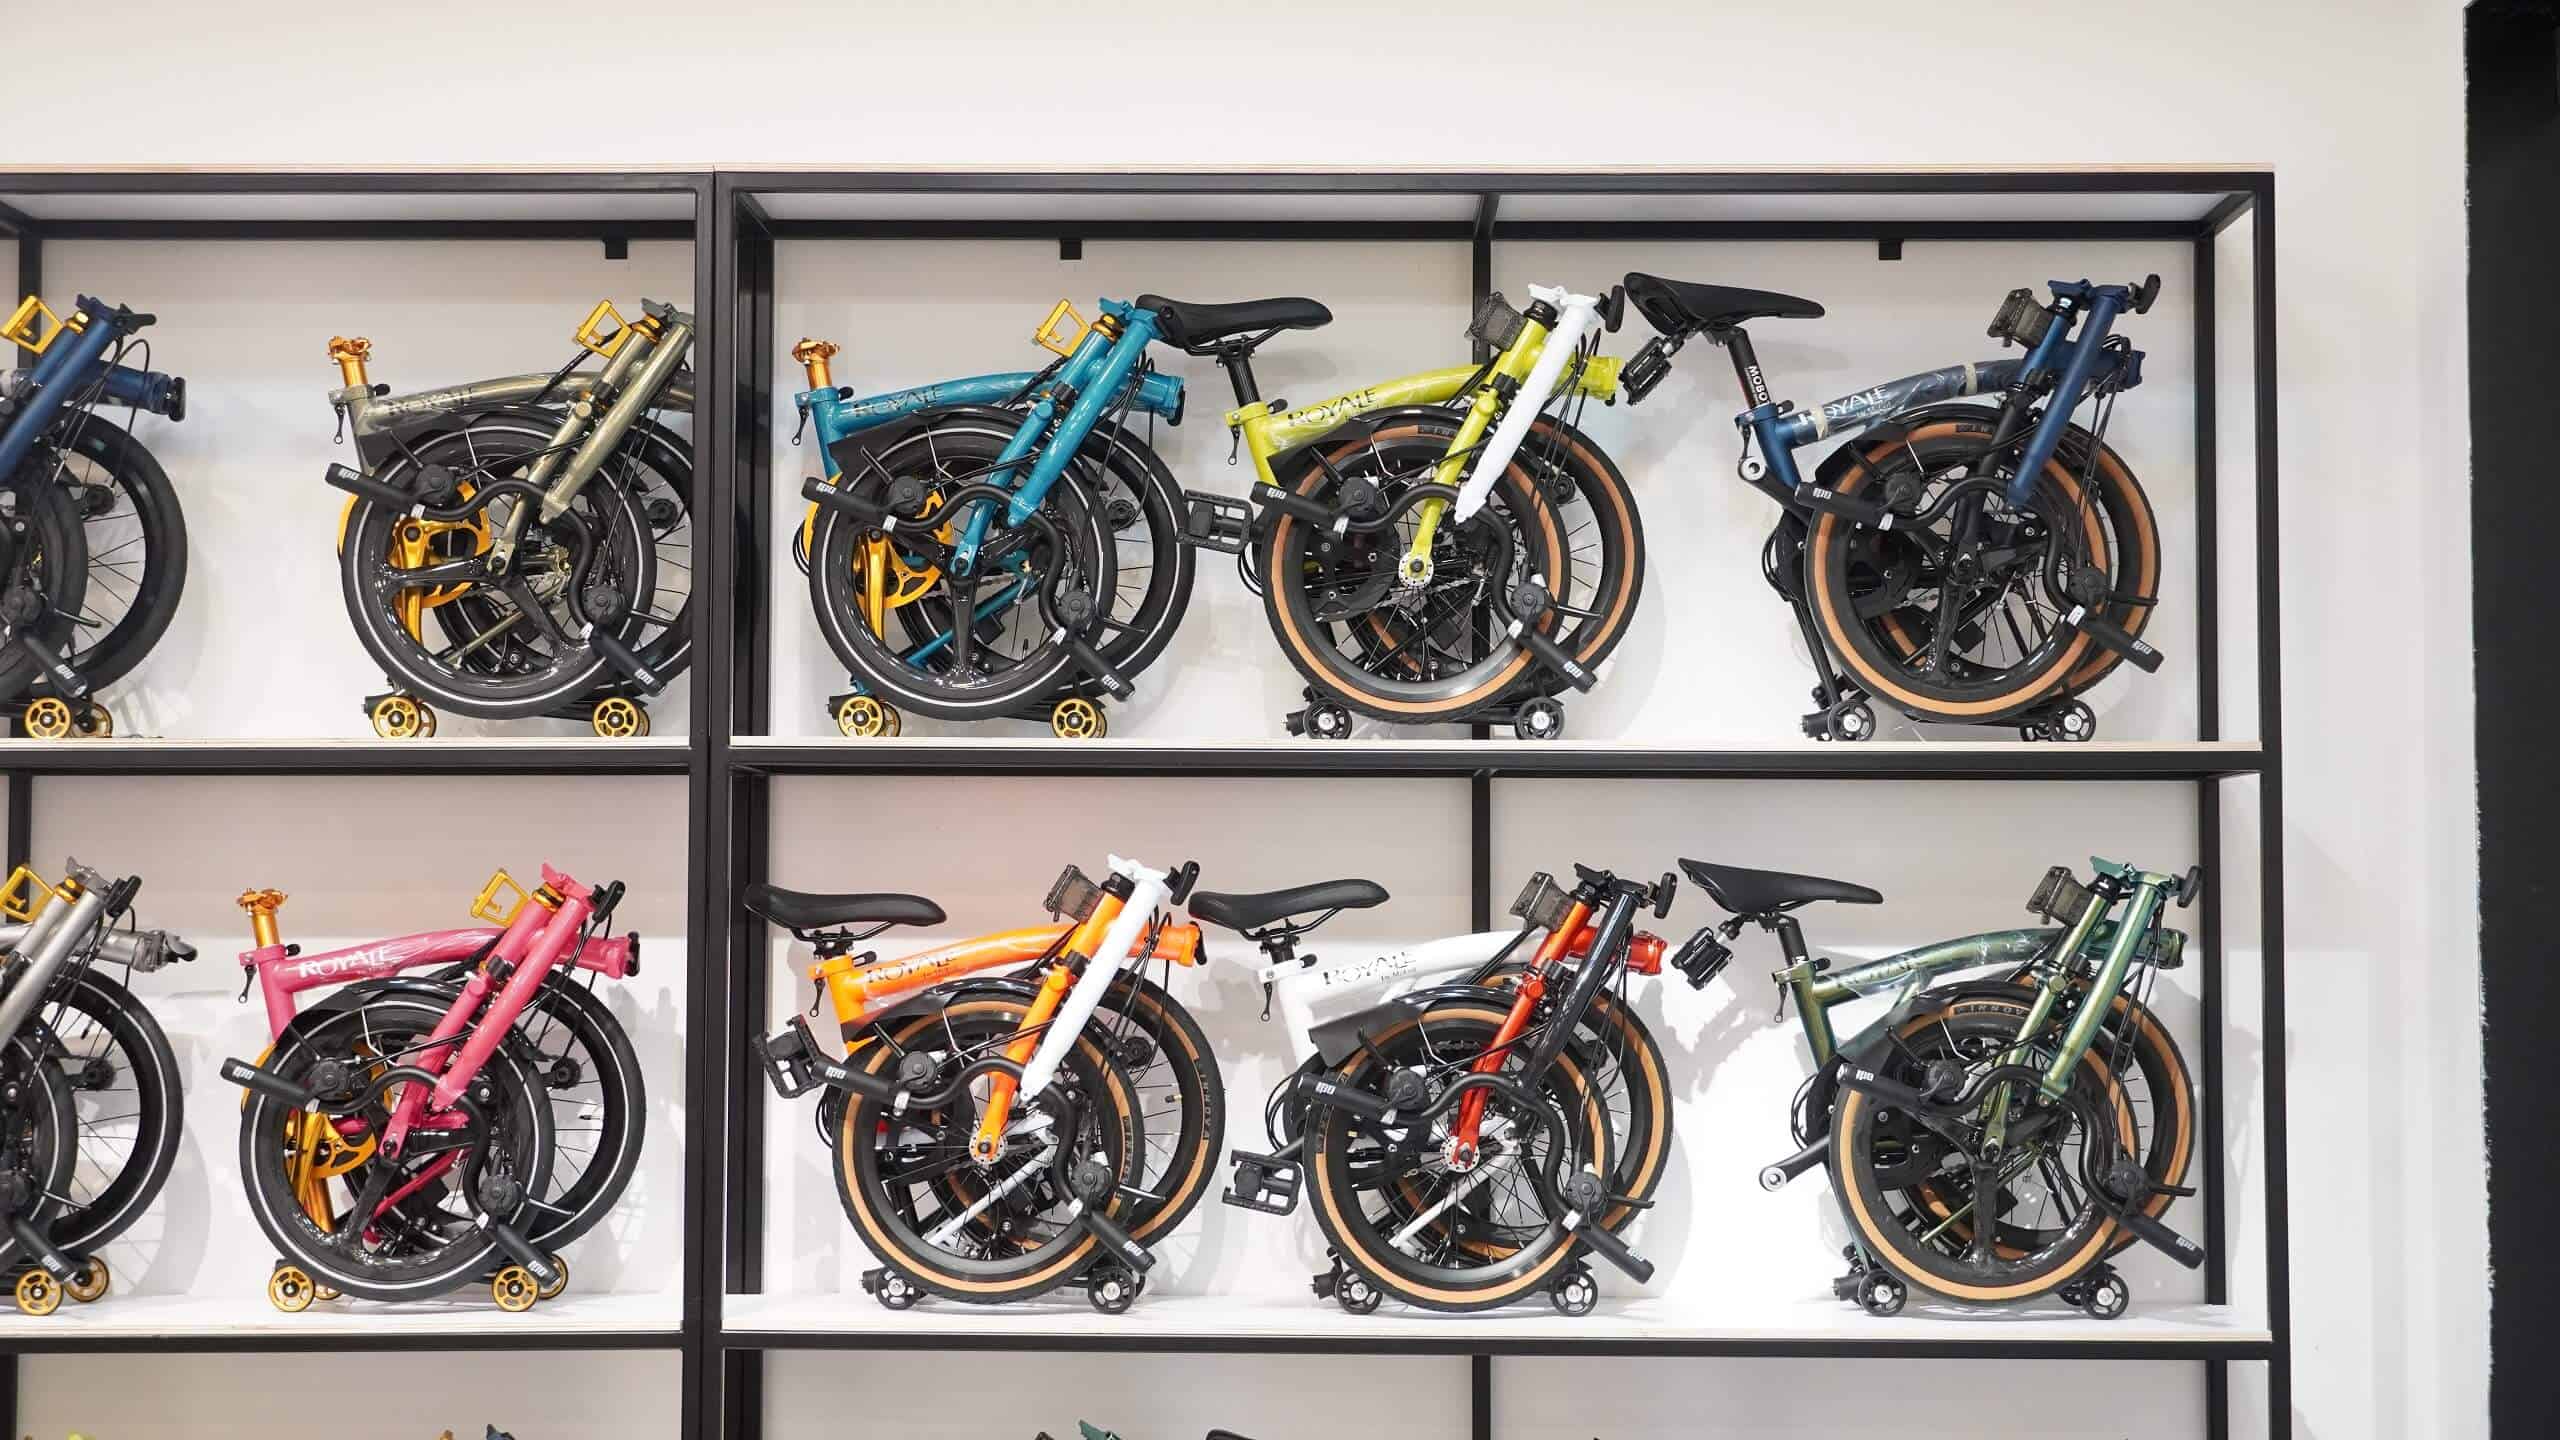 MOBOT Jurong 4 - Press release: MOBOT x ROYALE Opens 6th Bicycle Shop In JCube Jurong